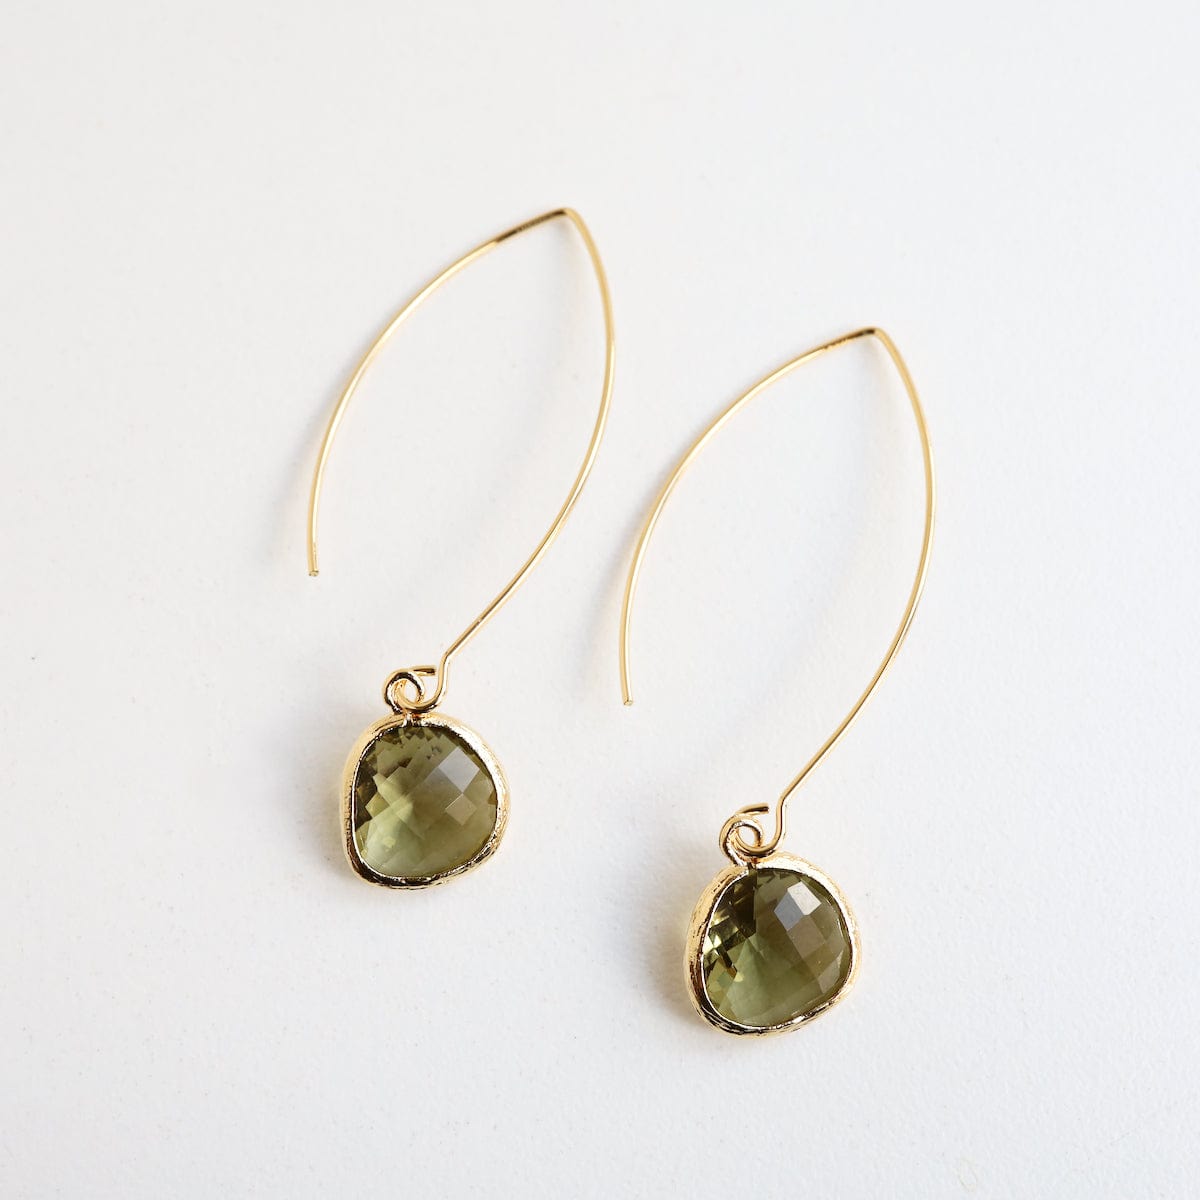 EAR-GPL Gold Plated Olive Crystal Earring